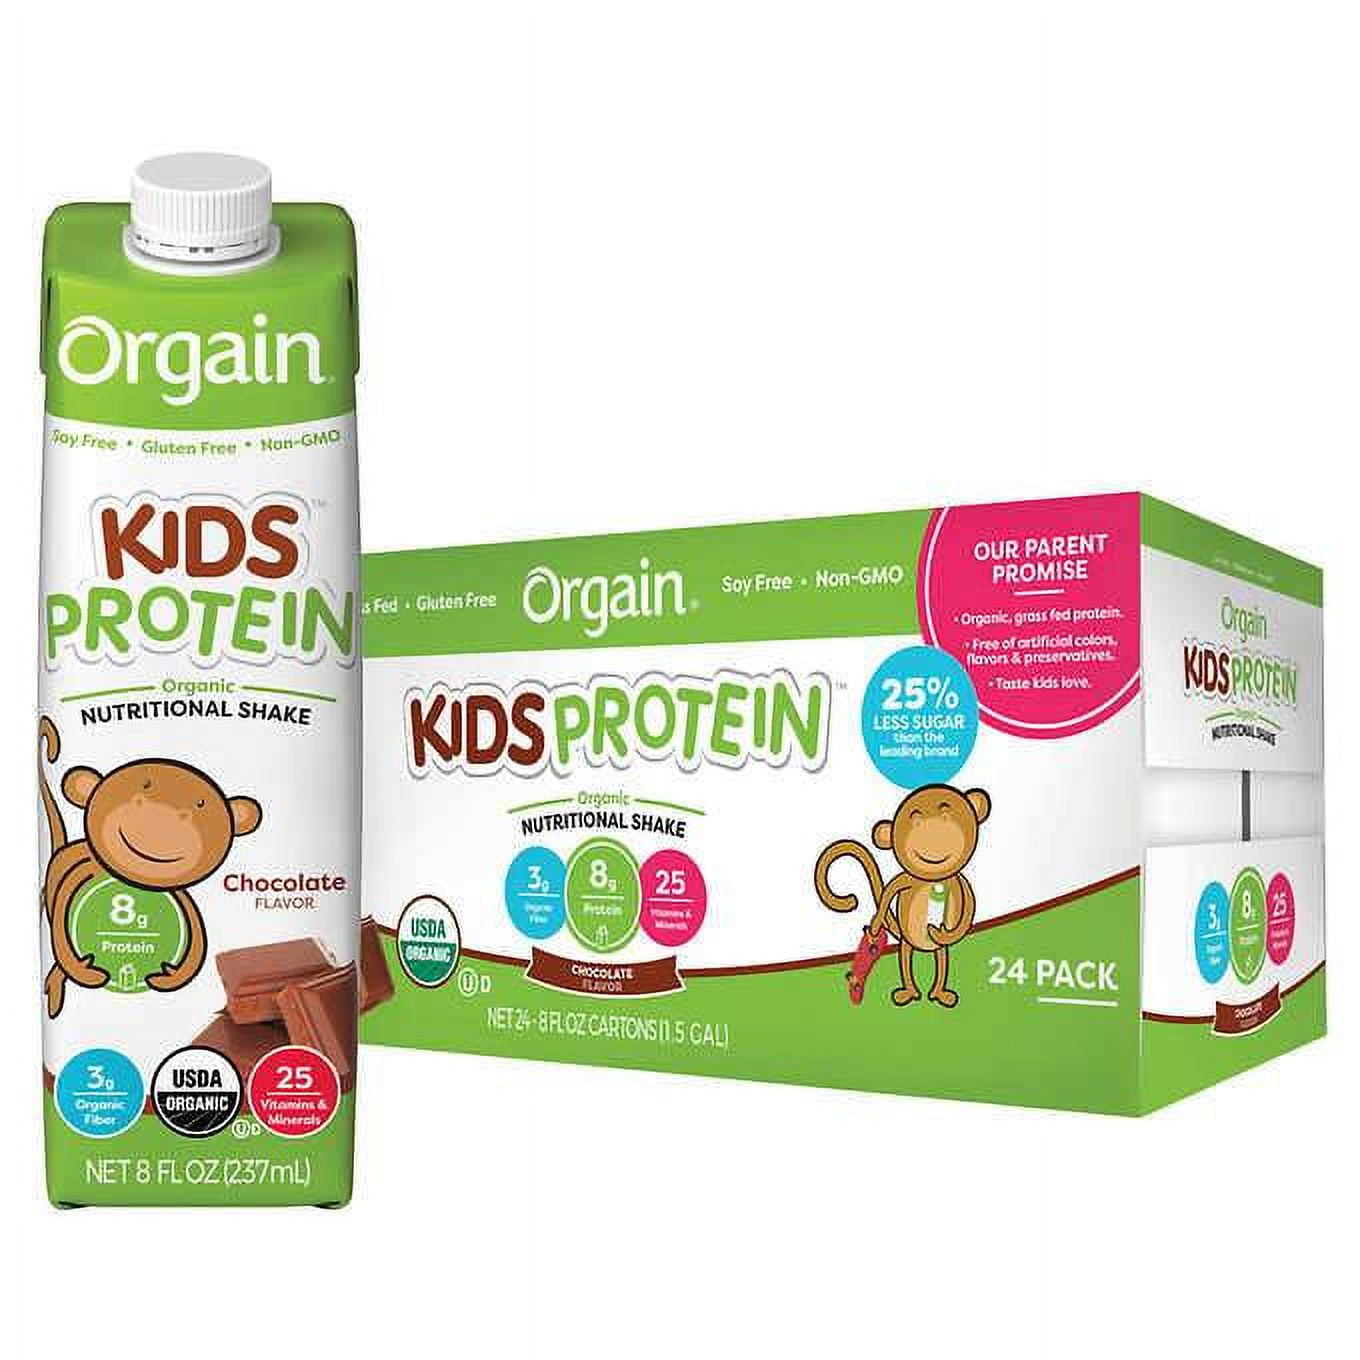 KIDS Protein On-the-Go, 2016-05-23